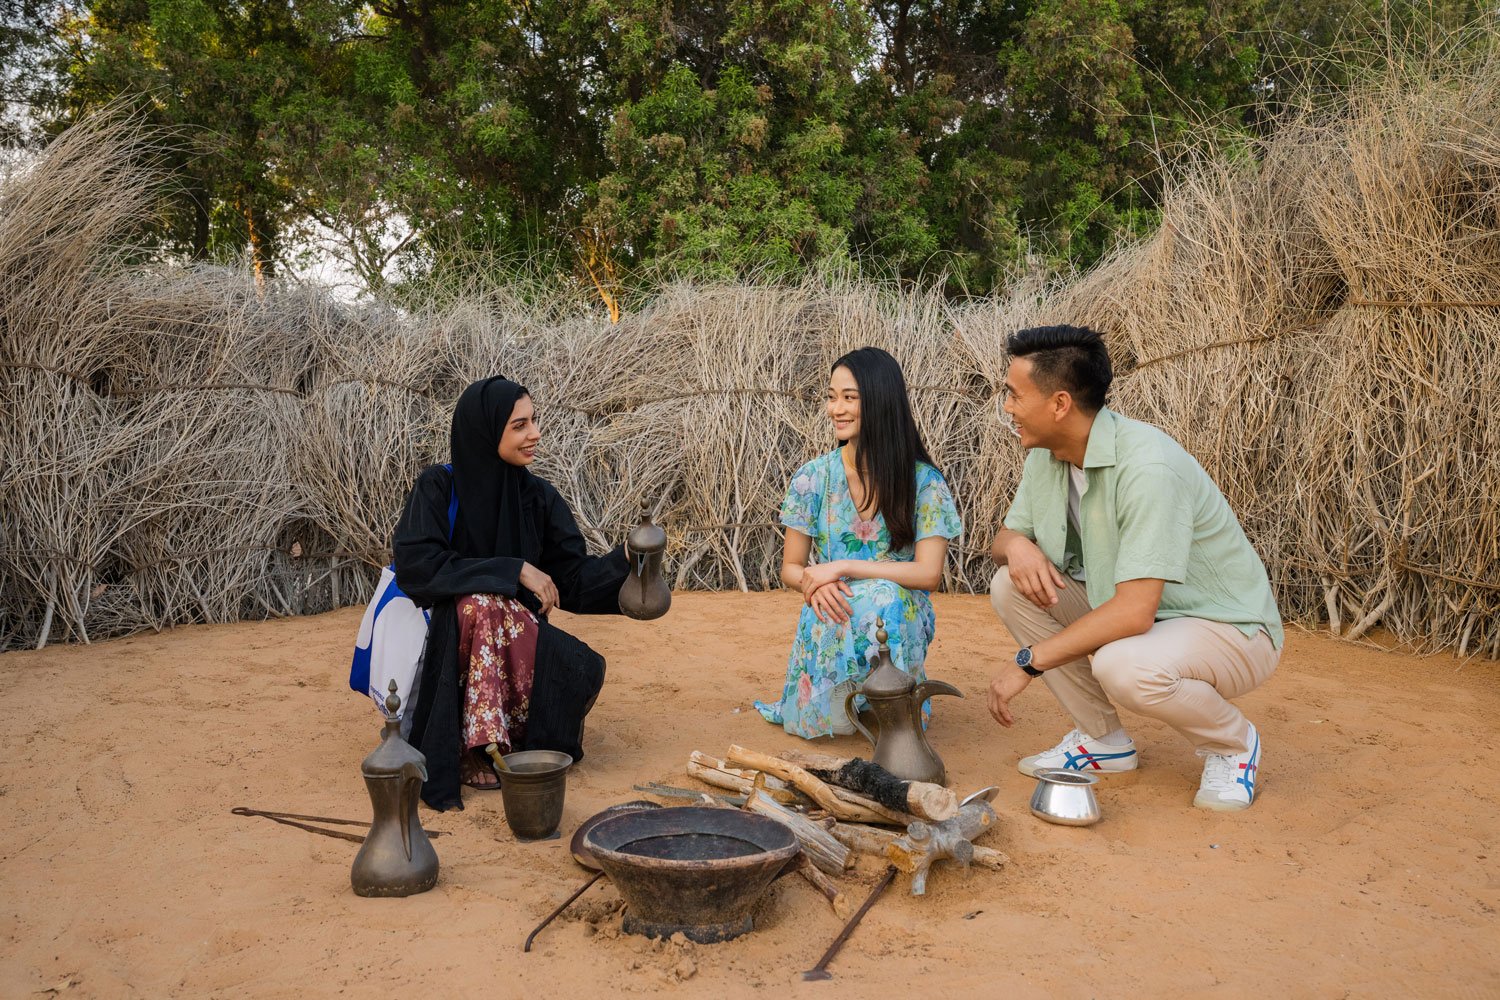 Visit a local ranch with an Emirati